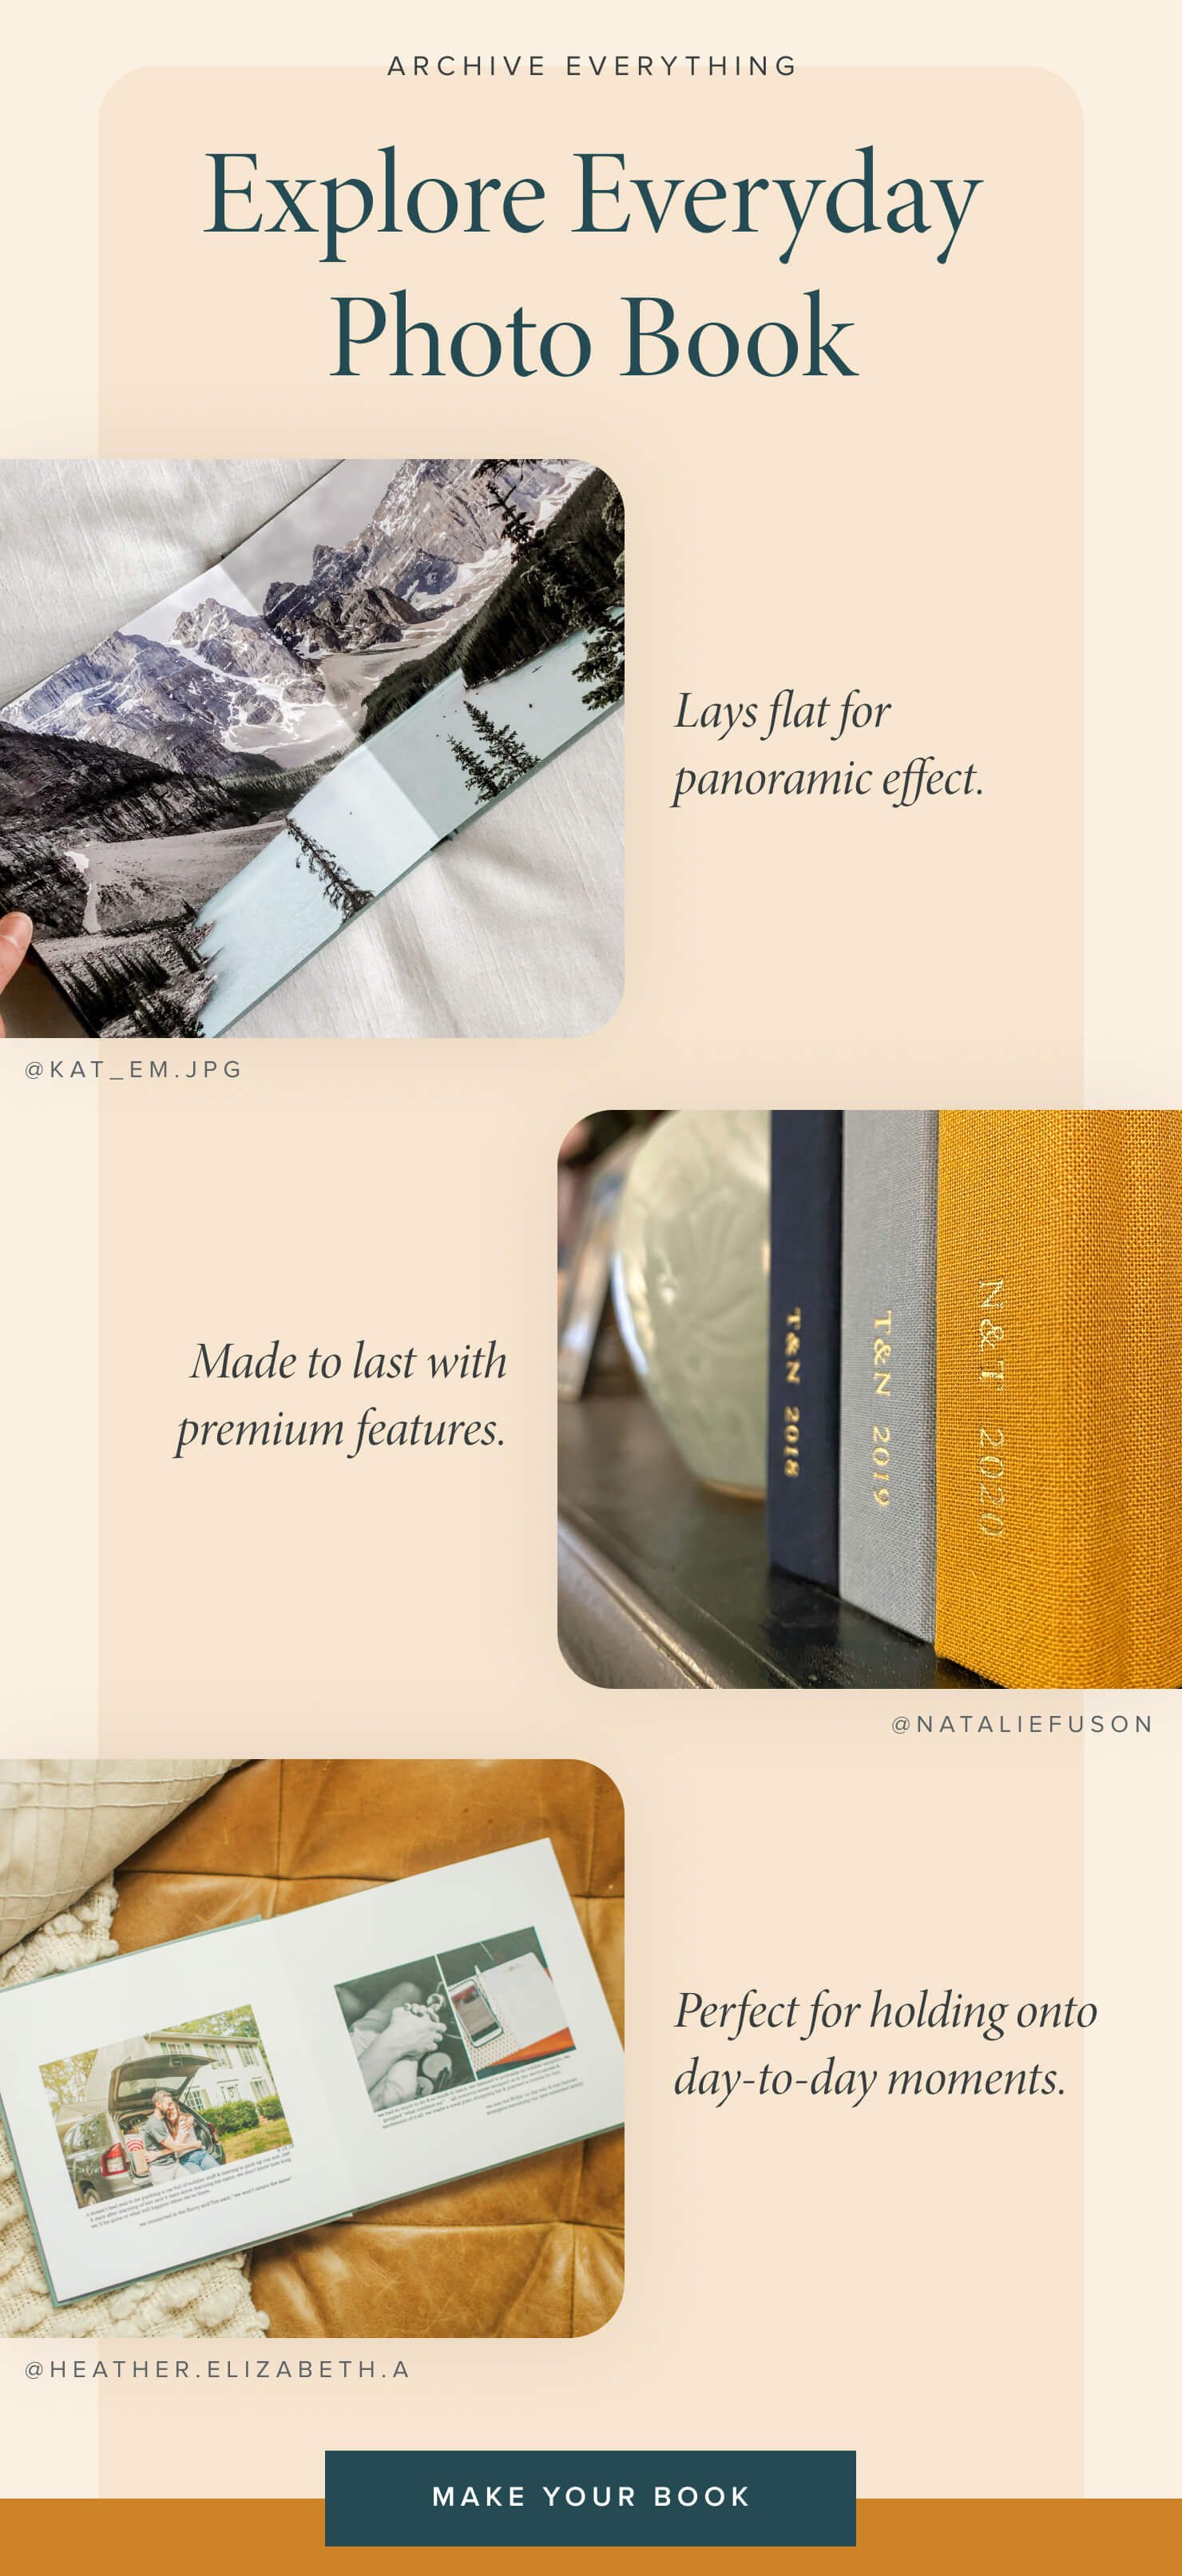 Archive Everything | Explore Everyday Photo Book | Lays flat for panoramic effect. | Made to last with premium features. | Perfect for holding onto day-to-day moments. | Start Designing